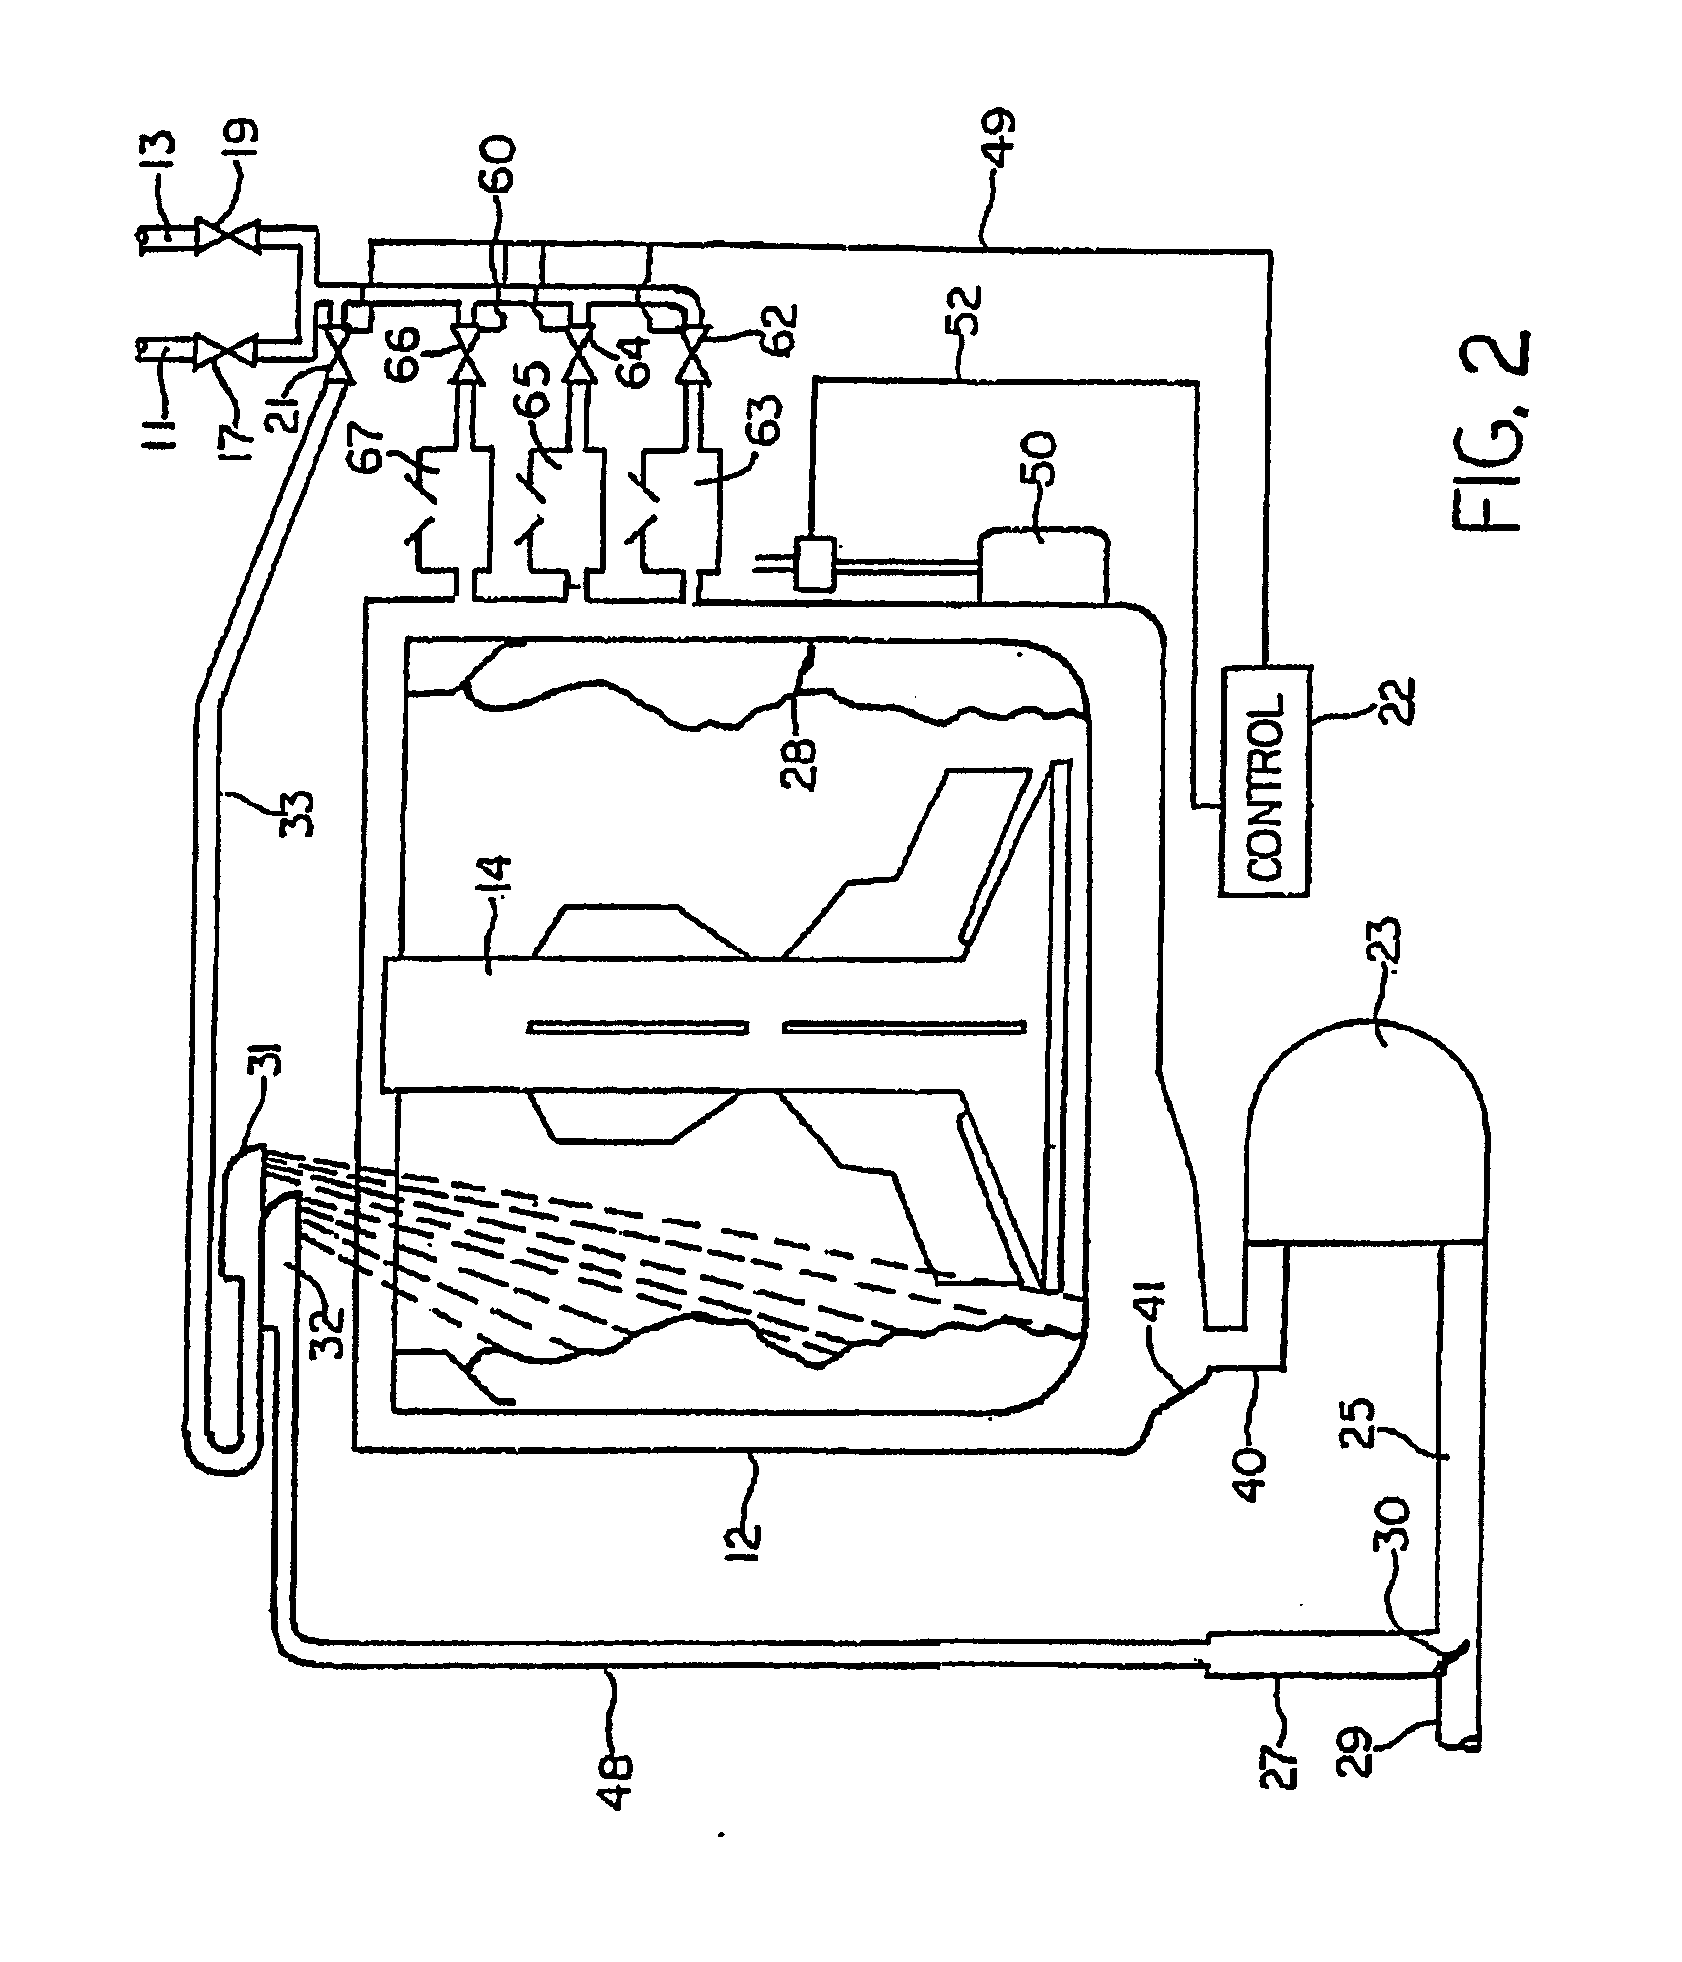 Stain removal process control method using BPM motor feedback